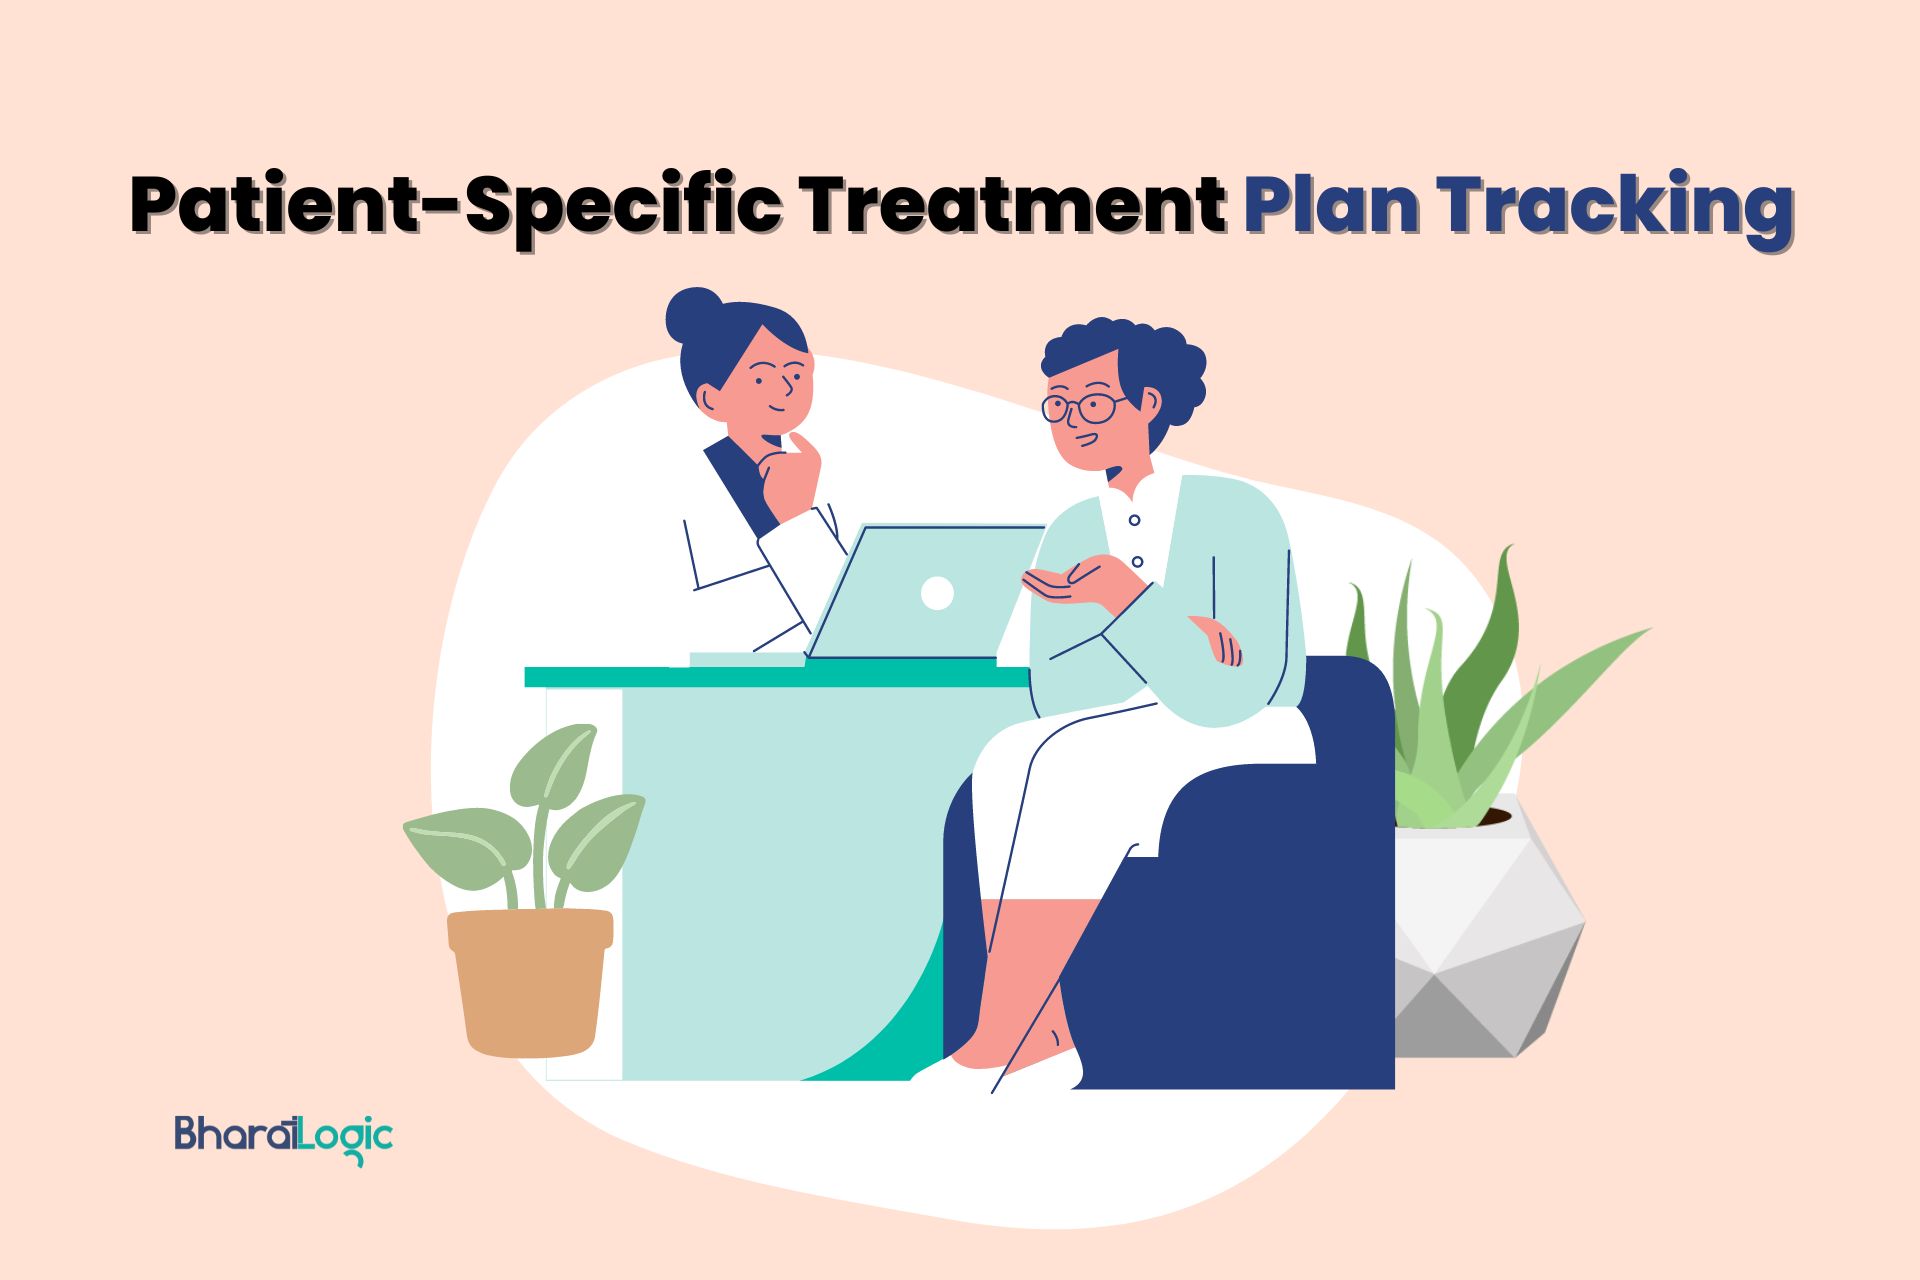 Improving Patient Outcomes through Patient-Specific Treatment Plan Tracking – Bharat Logic